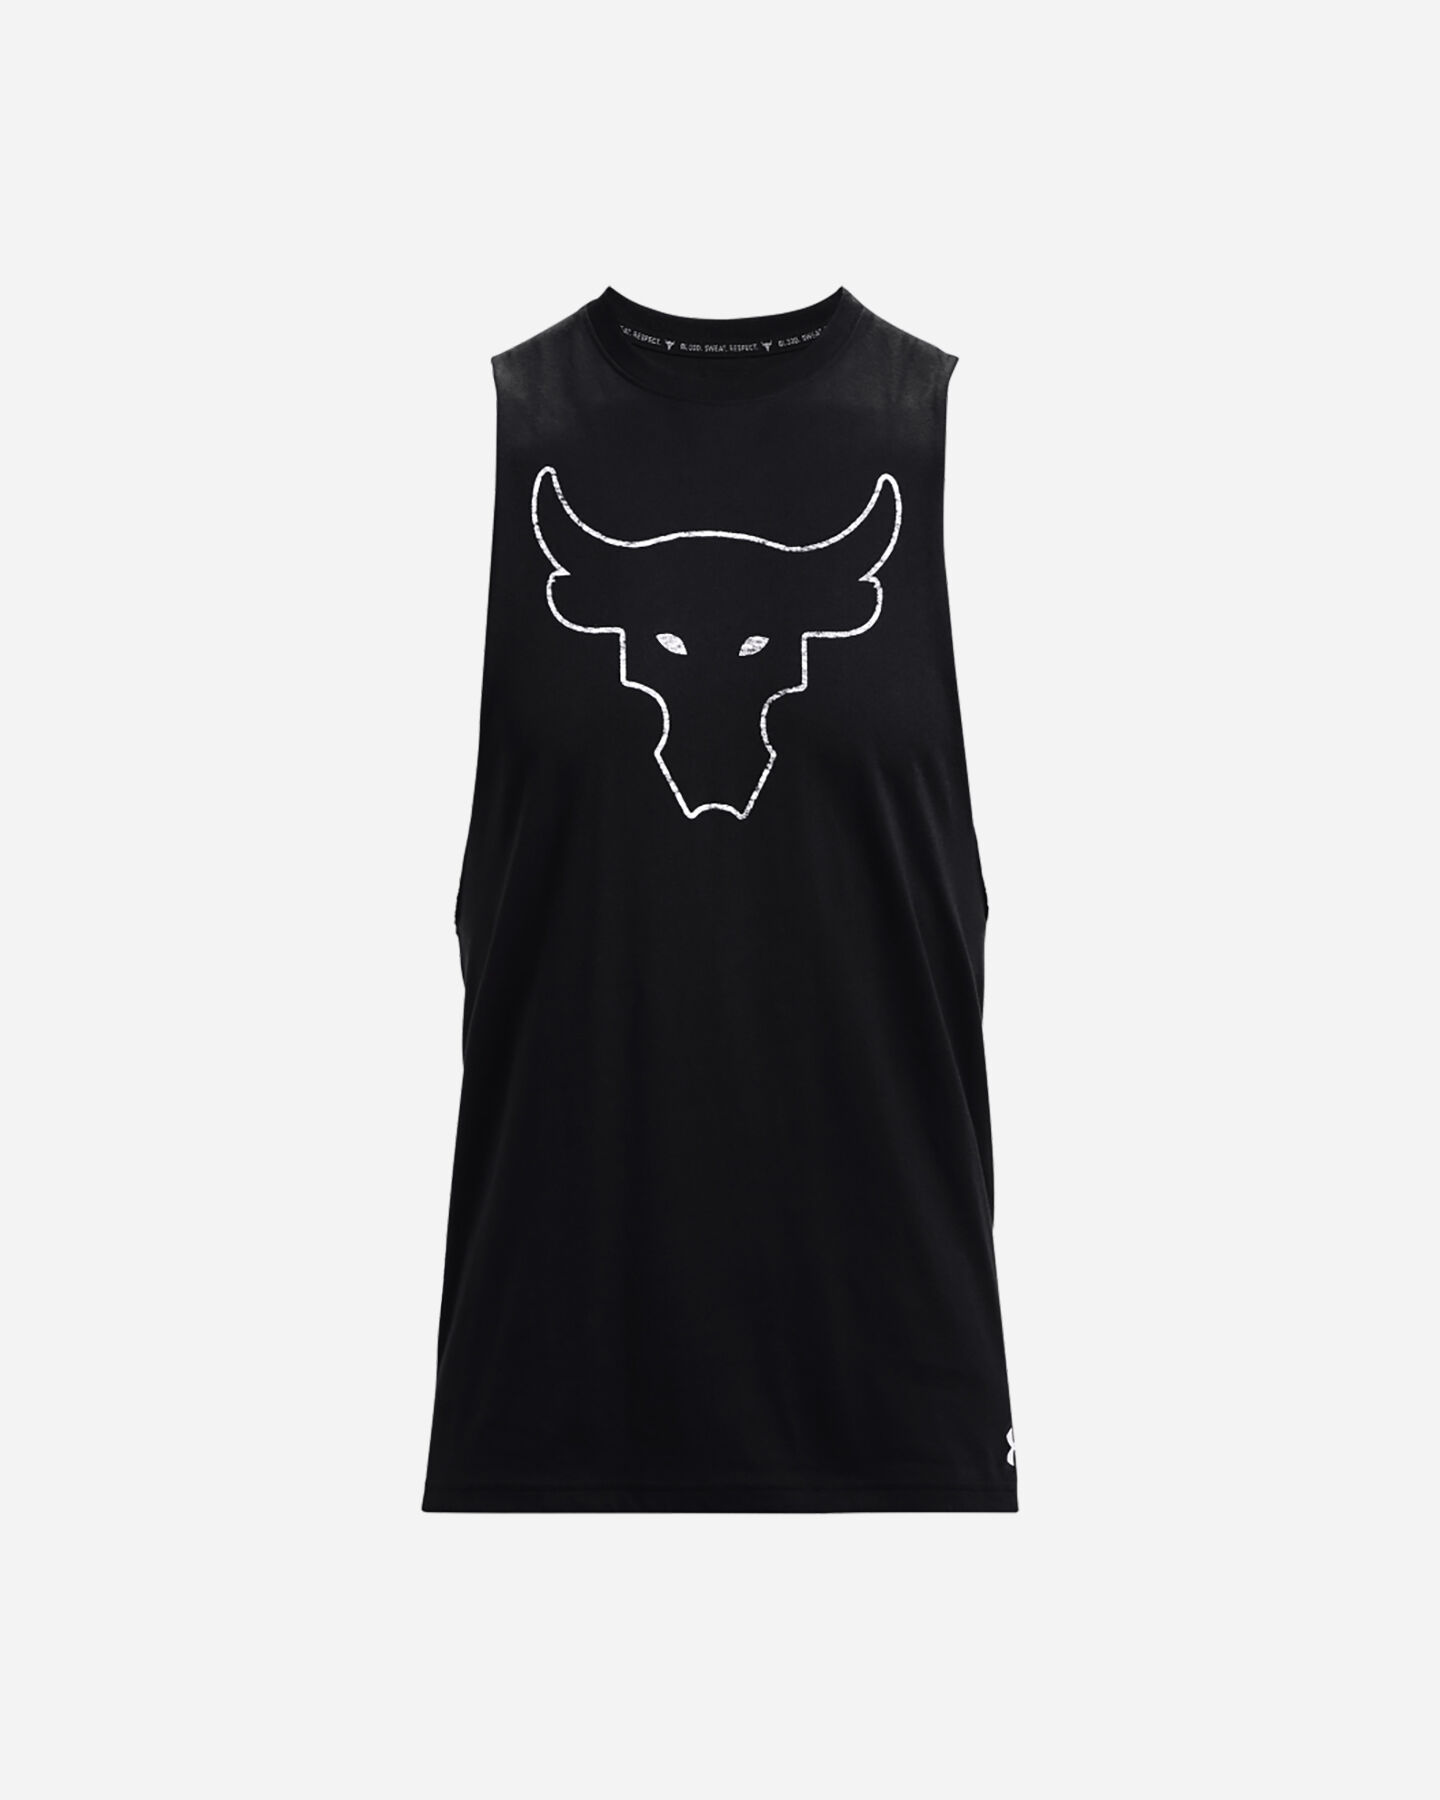  Canotta UNDER ARMOUR THE ROCK BRAHMA BULL M S5390728|0001|XS scatto 0